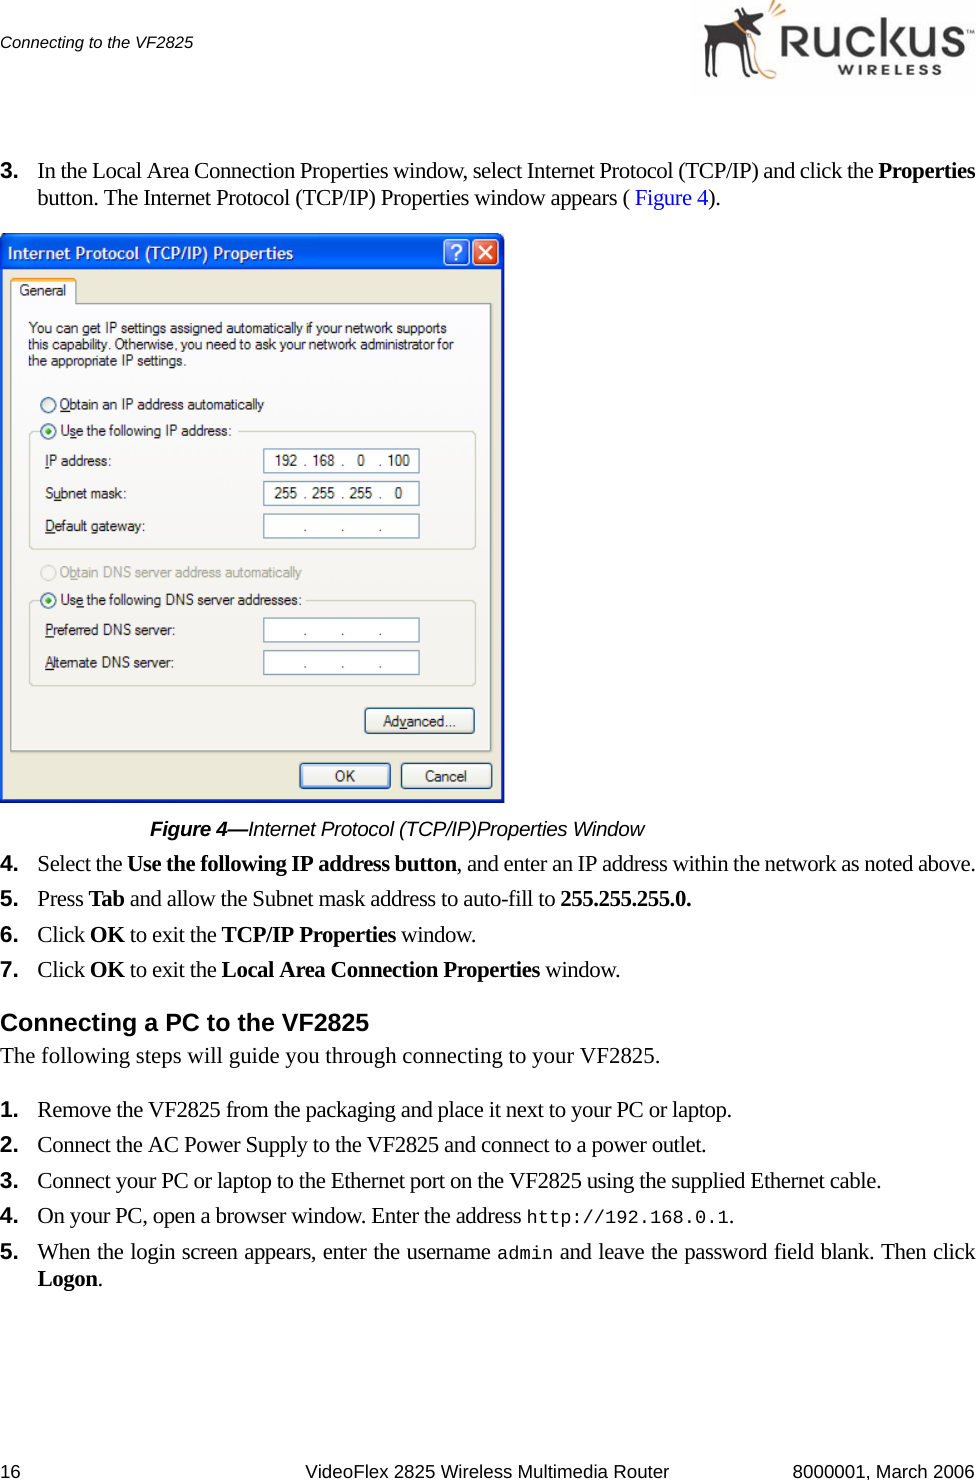 16 VideoFlex 2825 Wireless Multimedia Router 8000001, March 2006Connecting to the VF28253. In the Local Area Connection Properties window, select Internet Protocol (TCP/IP) and click the Propertiesbutton. The Internet Protocol (TCP/IP) Properties window appears ( Figure 4).Figure 4—Internet Protocol (TCP/IP)Properties Window4. Select the Use the following IP address button, and enter an IP address within the network as noted above.5. Press Tab and allow the Subnet mask address to auto-fill to 255.255.255.0.6. Click OK to exit the TCP/IP Properties window.7. Click OK to exit the Local Area Connection Properties window.Connecting a PC to the VF2825The following steps will guide you through connecting to your VF2825.1. Remove the VF2825 from the packaging and place it next to your PC or laptop.2. Connect the AC Power Supply to the VF2825 and connect to a power outlet.3. Connect your PC or laptop to the Ethernet port on the VF2825 using the supplied Ethernet cable.4. On your PC, open a browser window. Enter the address http://192.168.0.1. 5. When the login screen appears, enter the username admin and leave the password field blank. Then clickLogon.